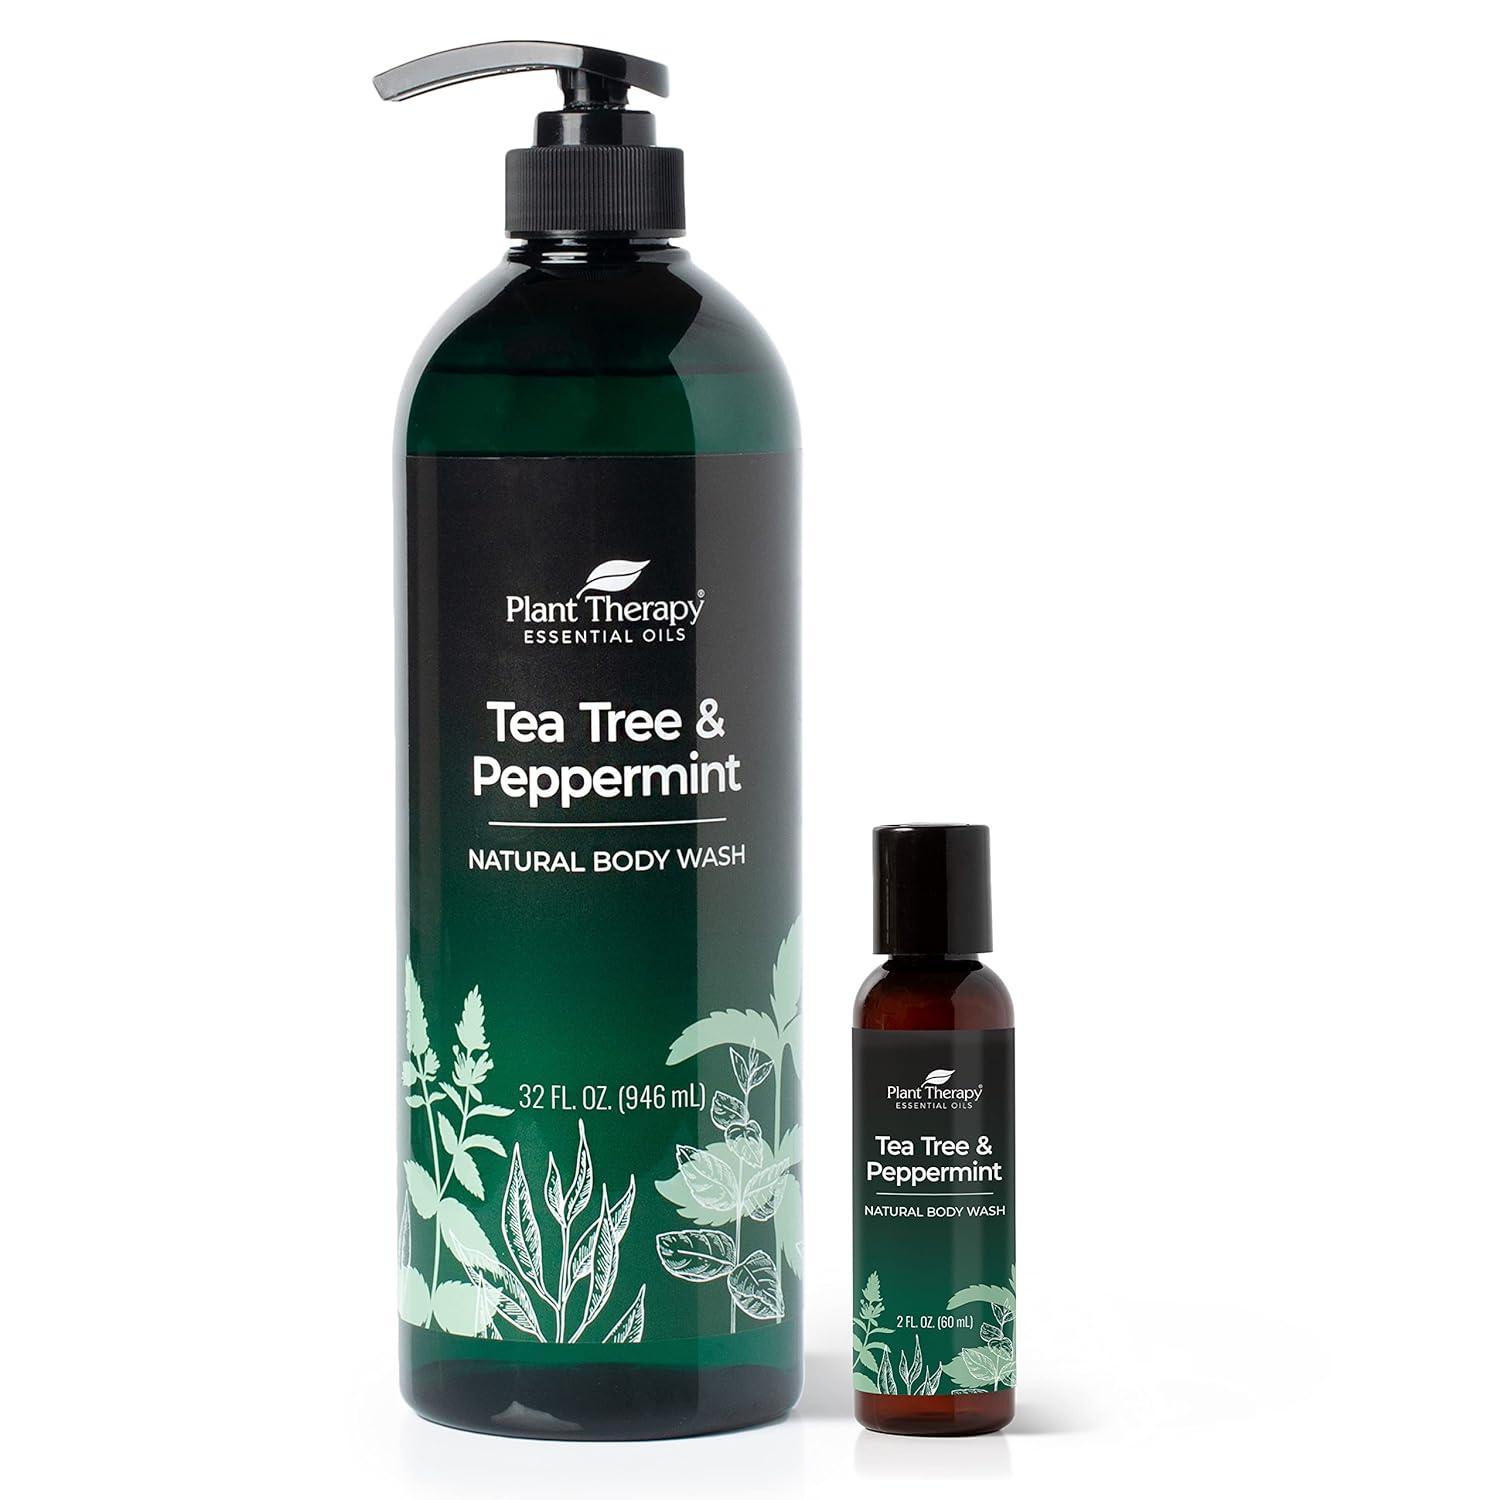 Plant Therapy Tea Tree and Peppermint Essential Oil Natural Body Wash w/pump 32 oz with 2oz Travel Size, For all Skin Types, Sulfate Free Body Wash, For Men or Women